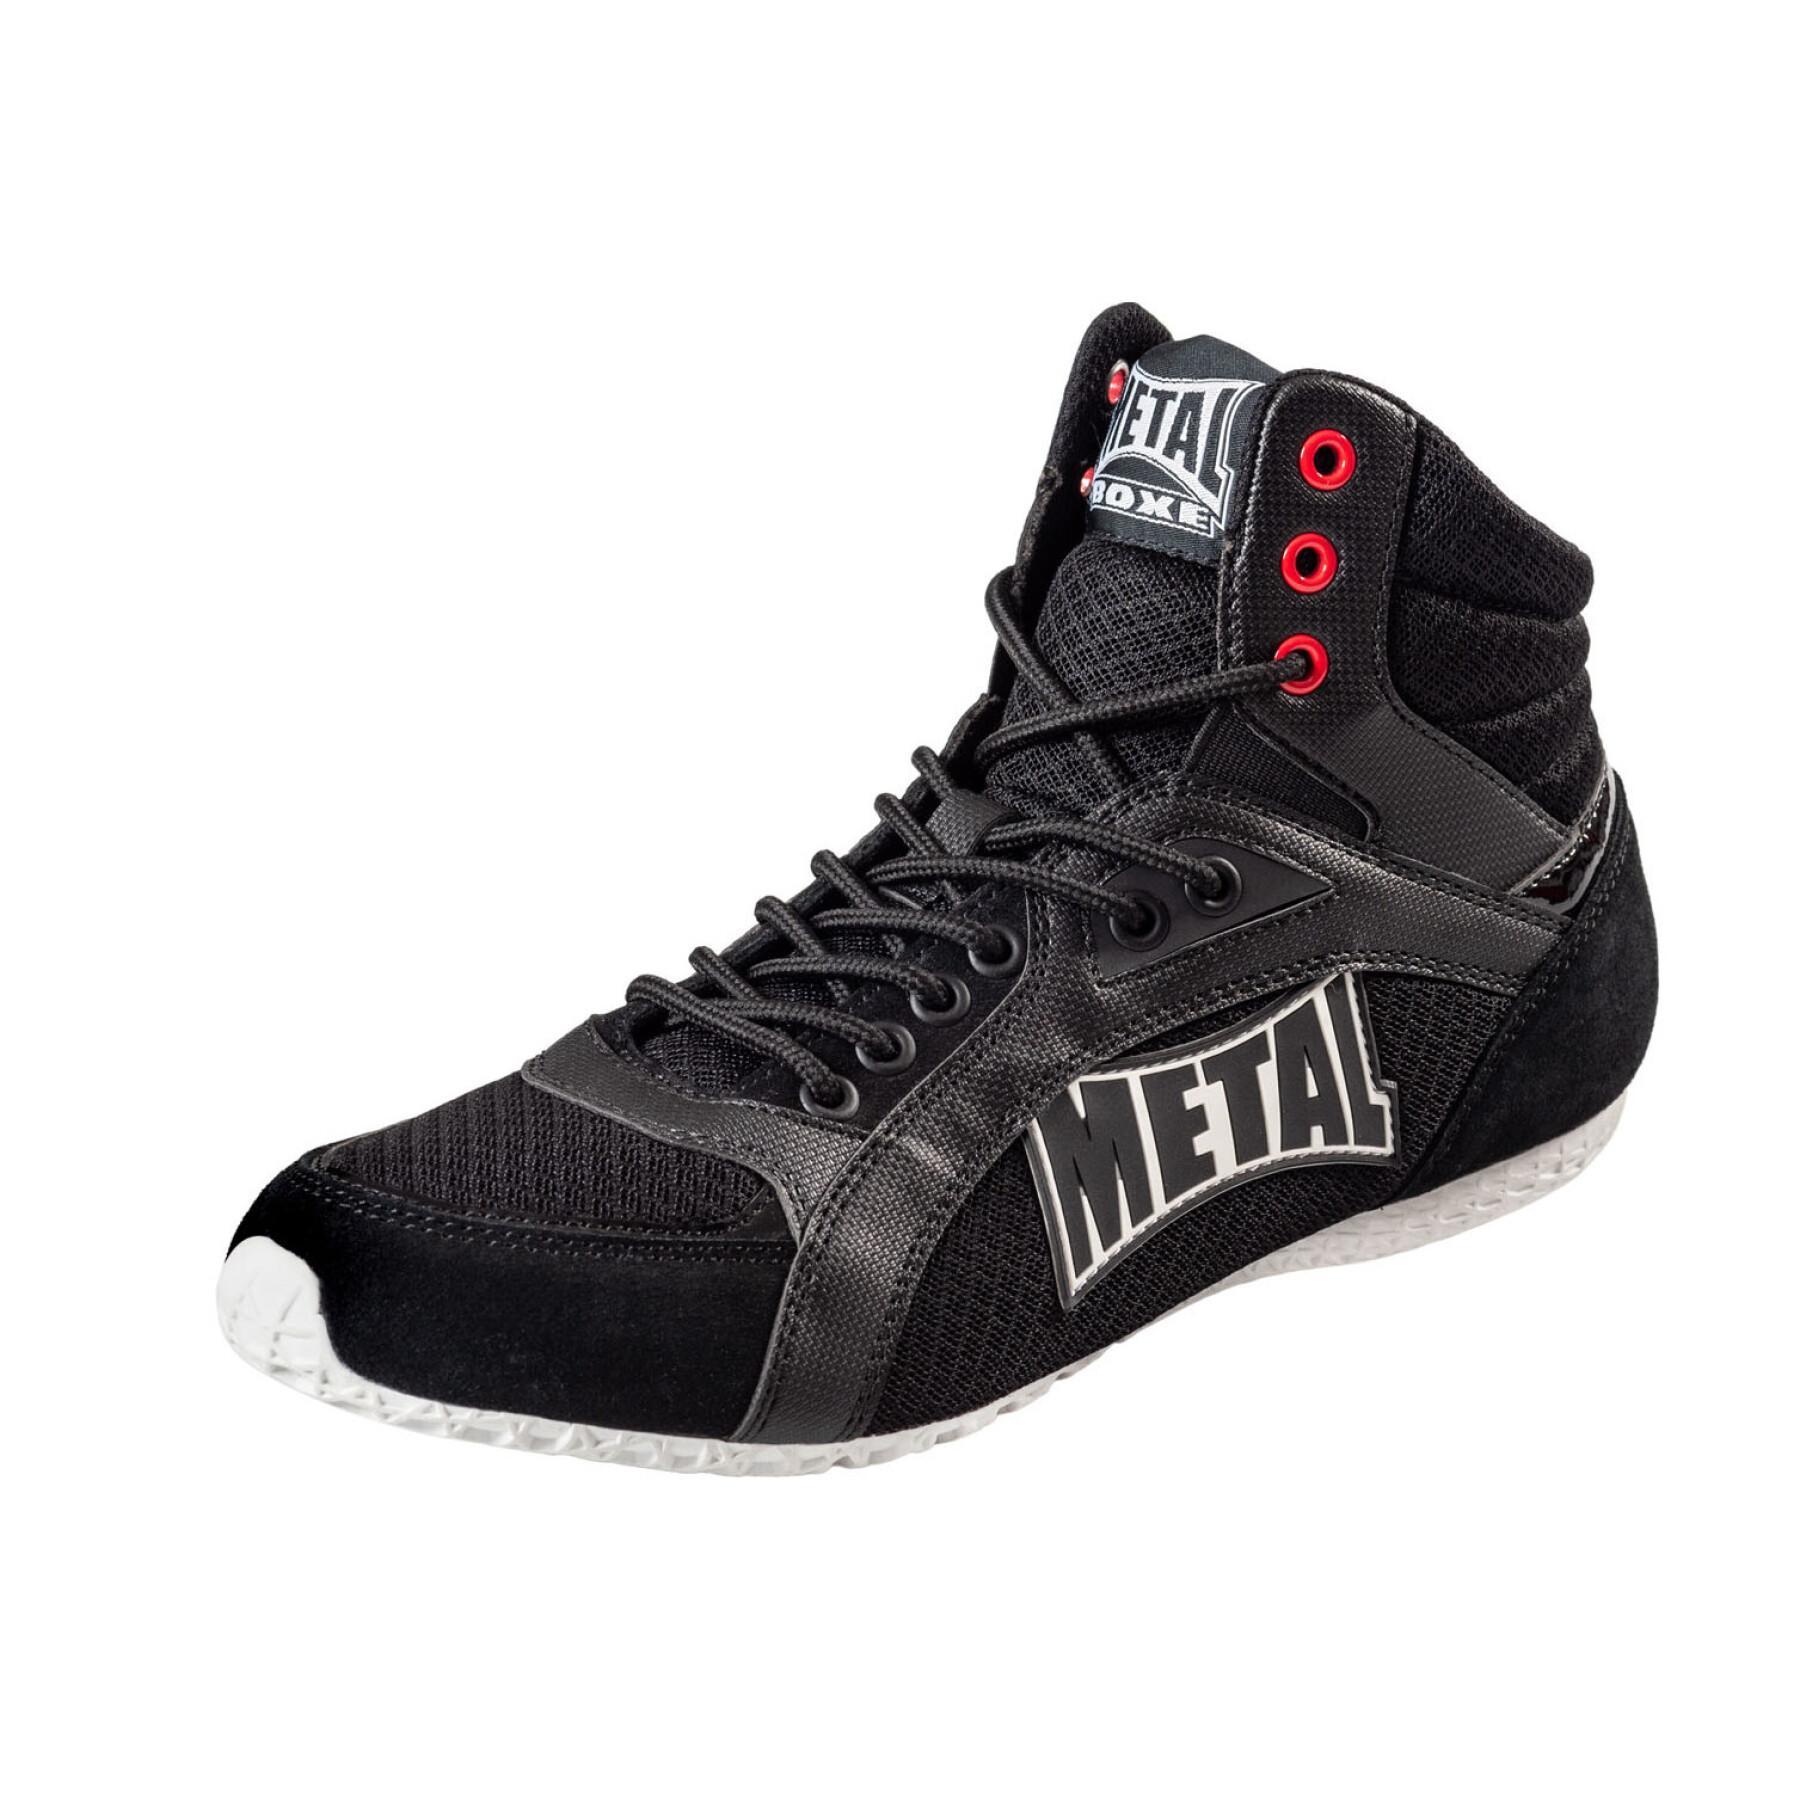 Chaussures multiboxe Metal Boxe viper III